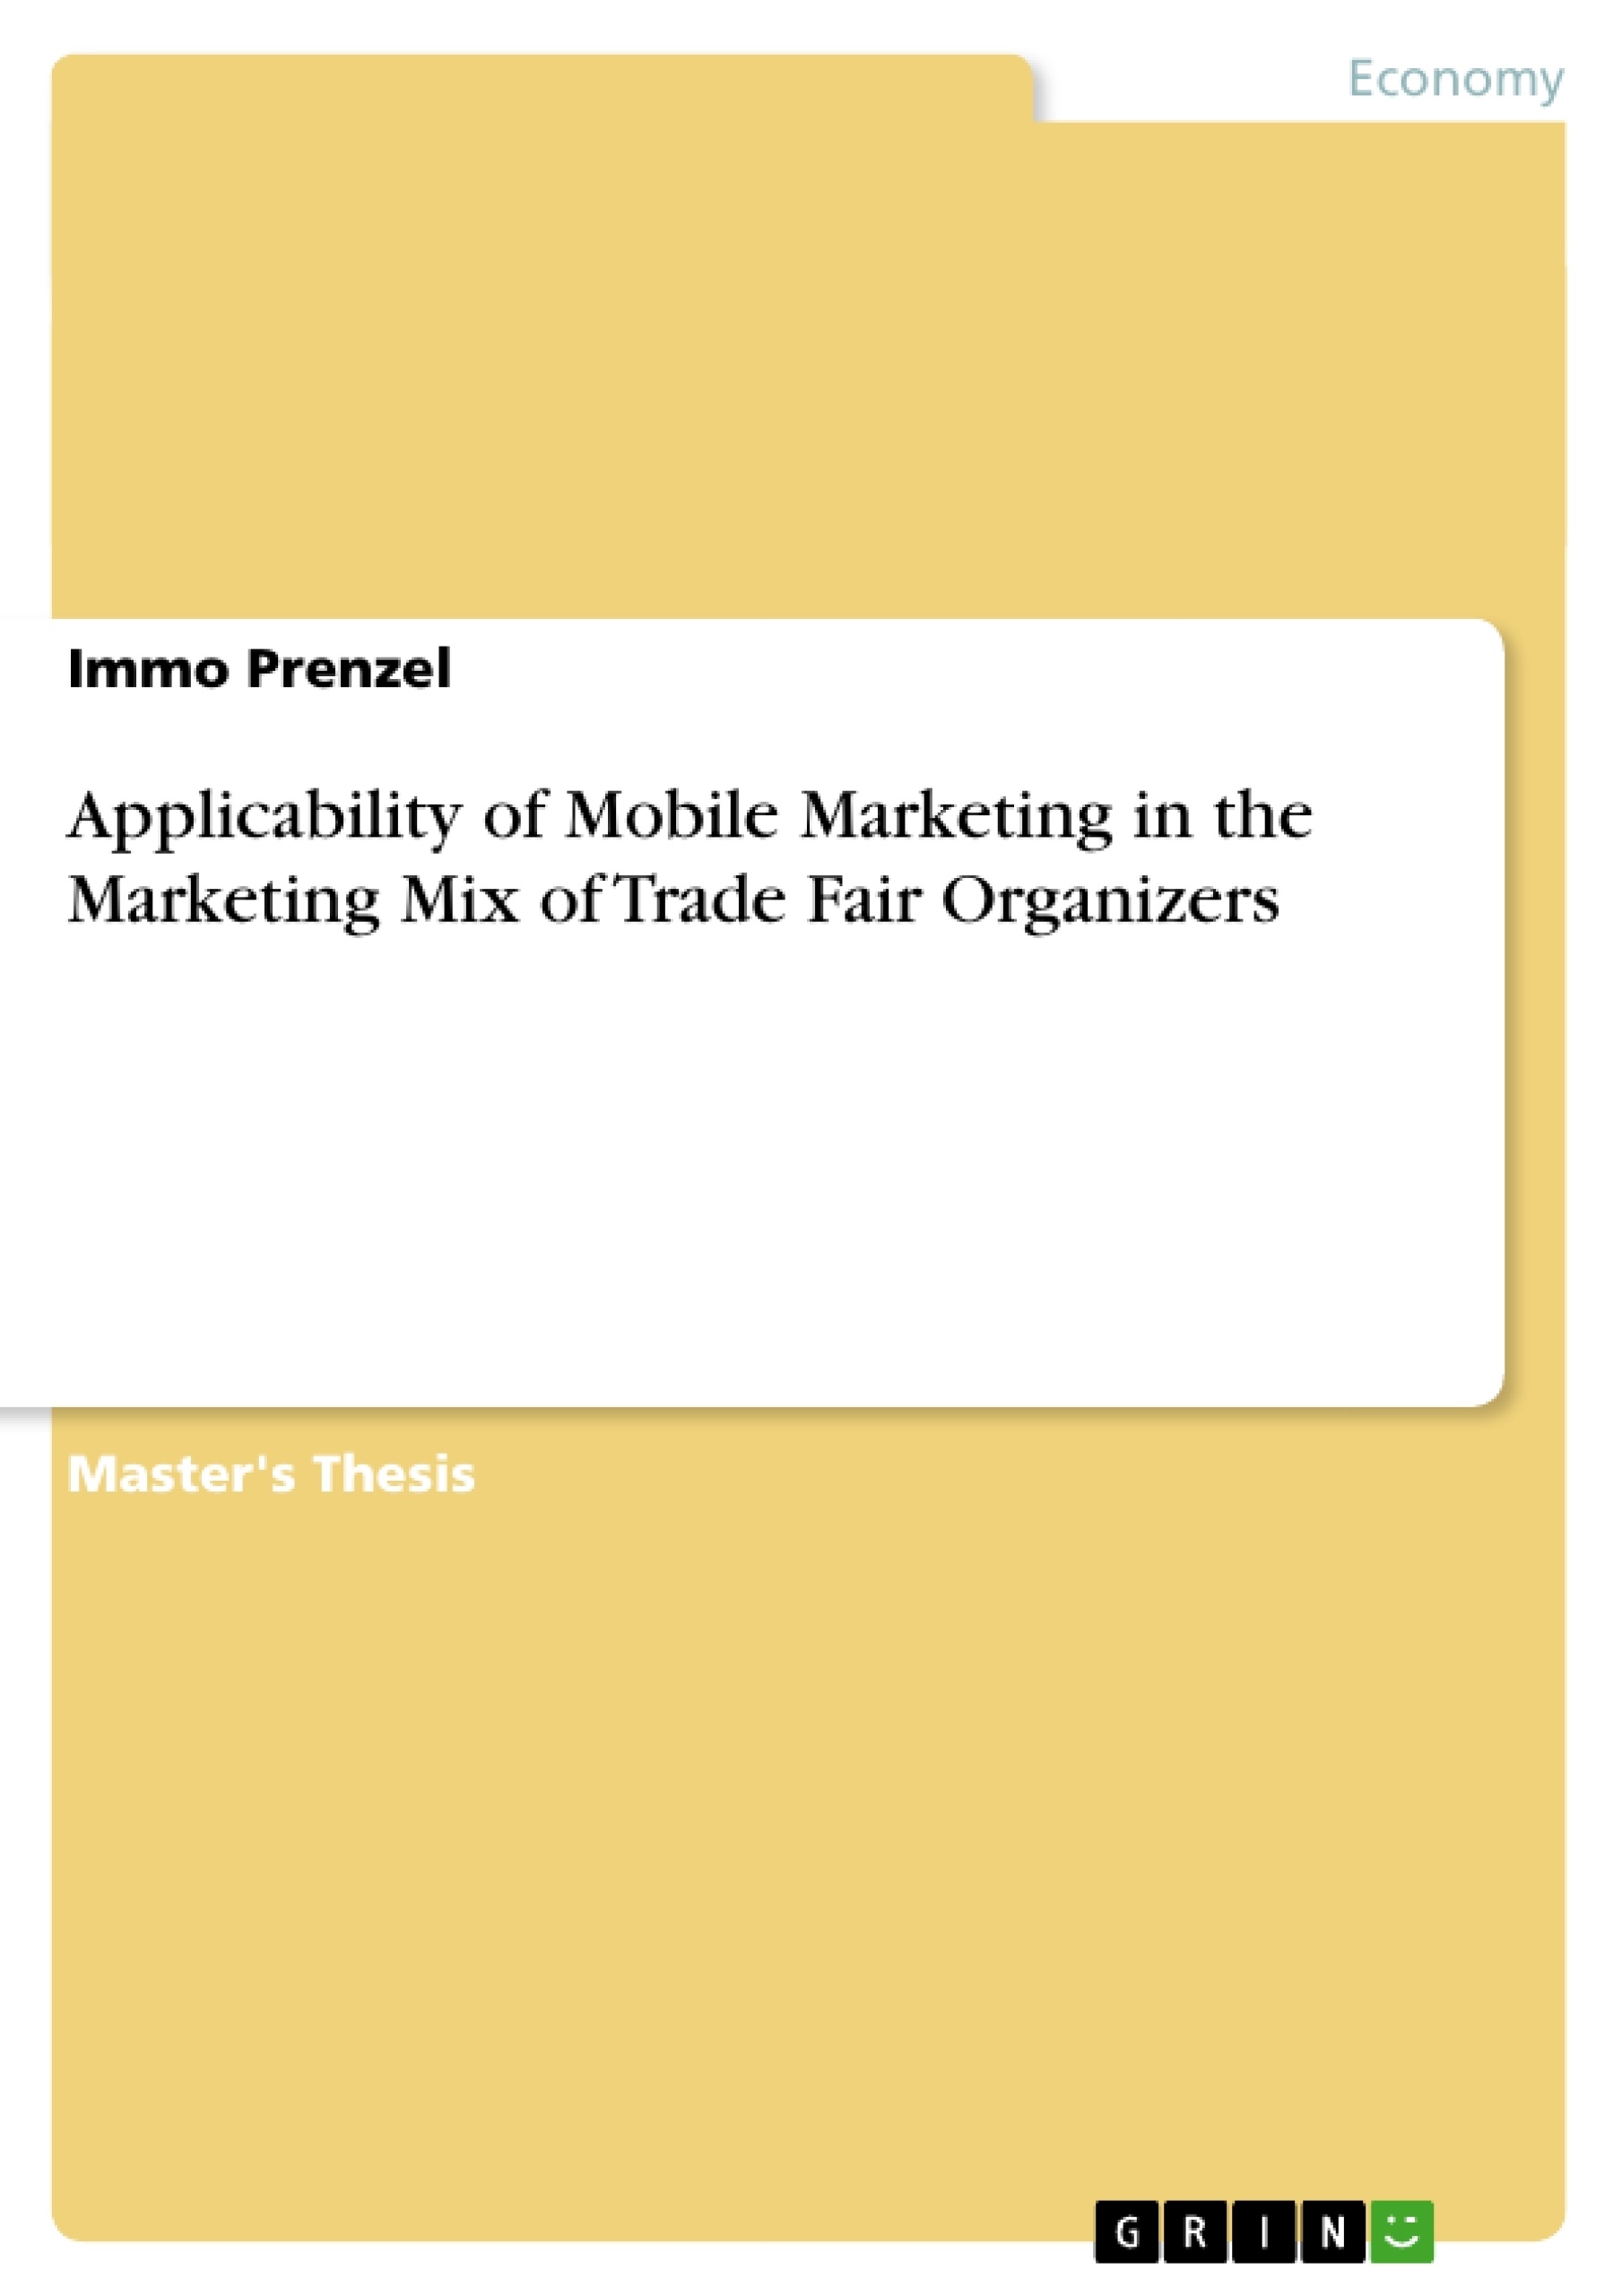 Title: Applicability of Mobile Marketing in the Marketing Mix of Trade Fair Organizers